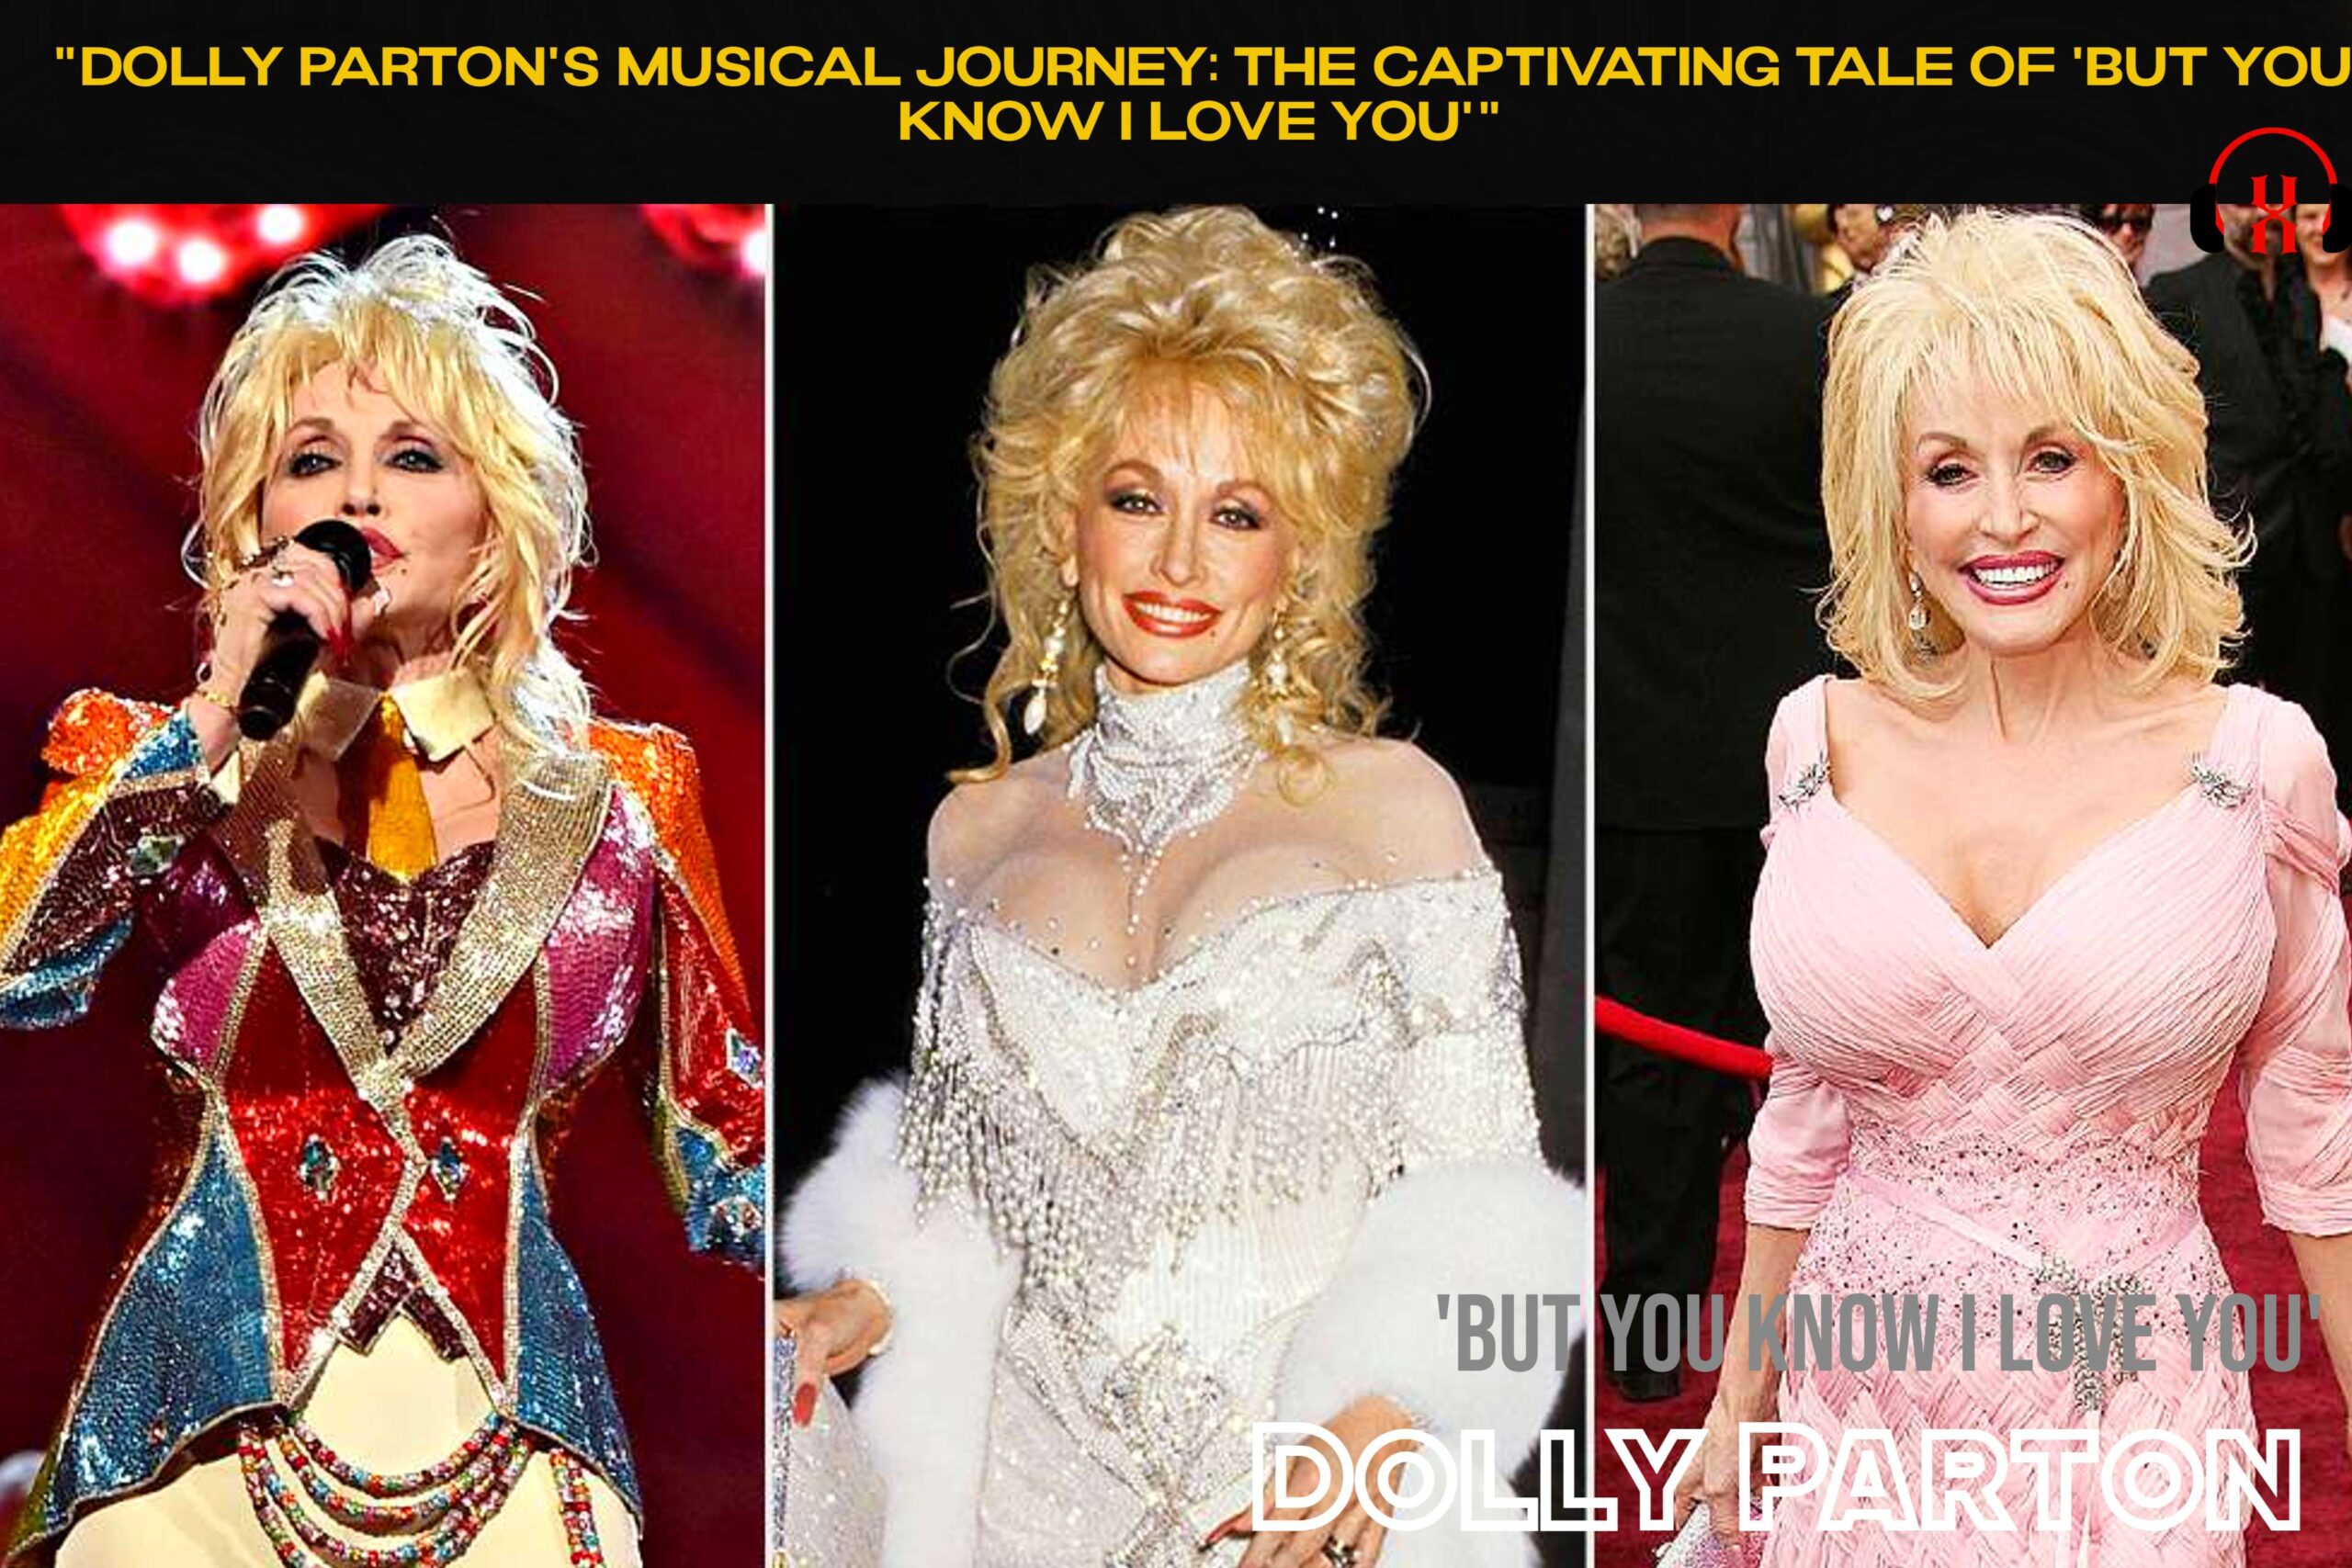 “Dolly Parton’s Musical Journey: The Captivating Tale of ‘But You Know I Love You'”